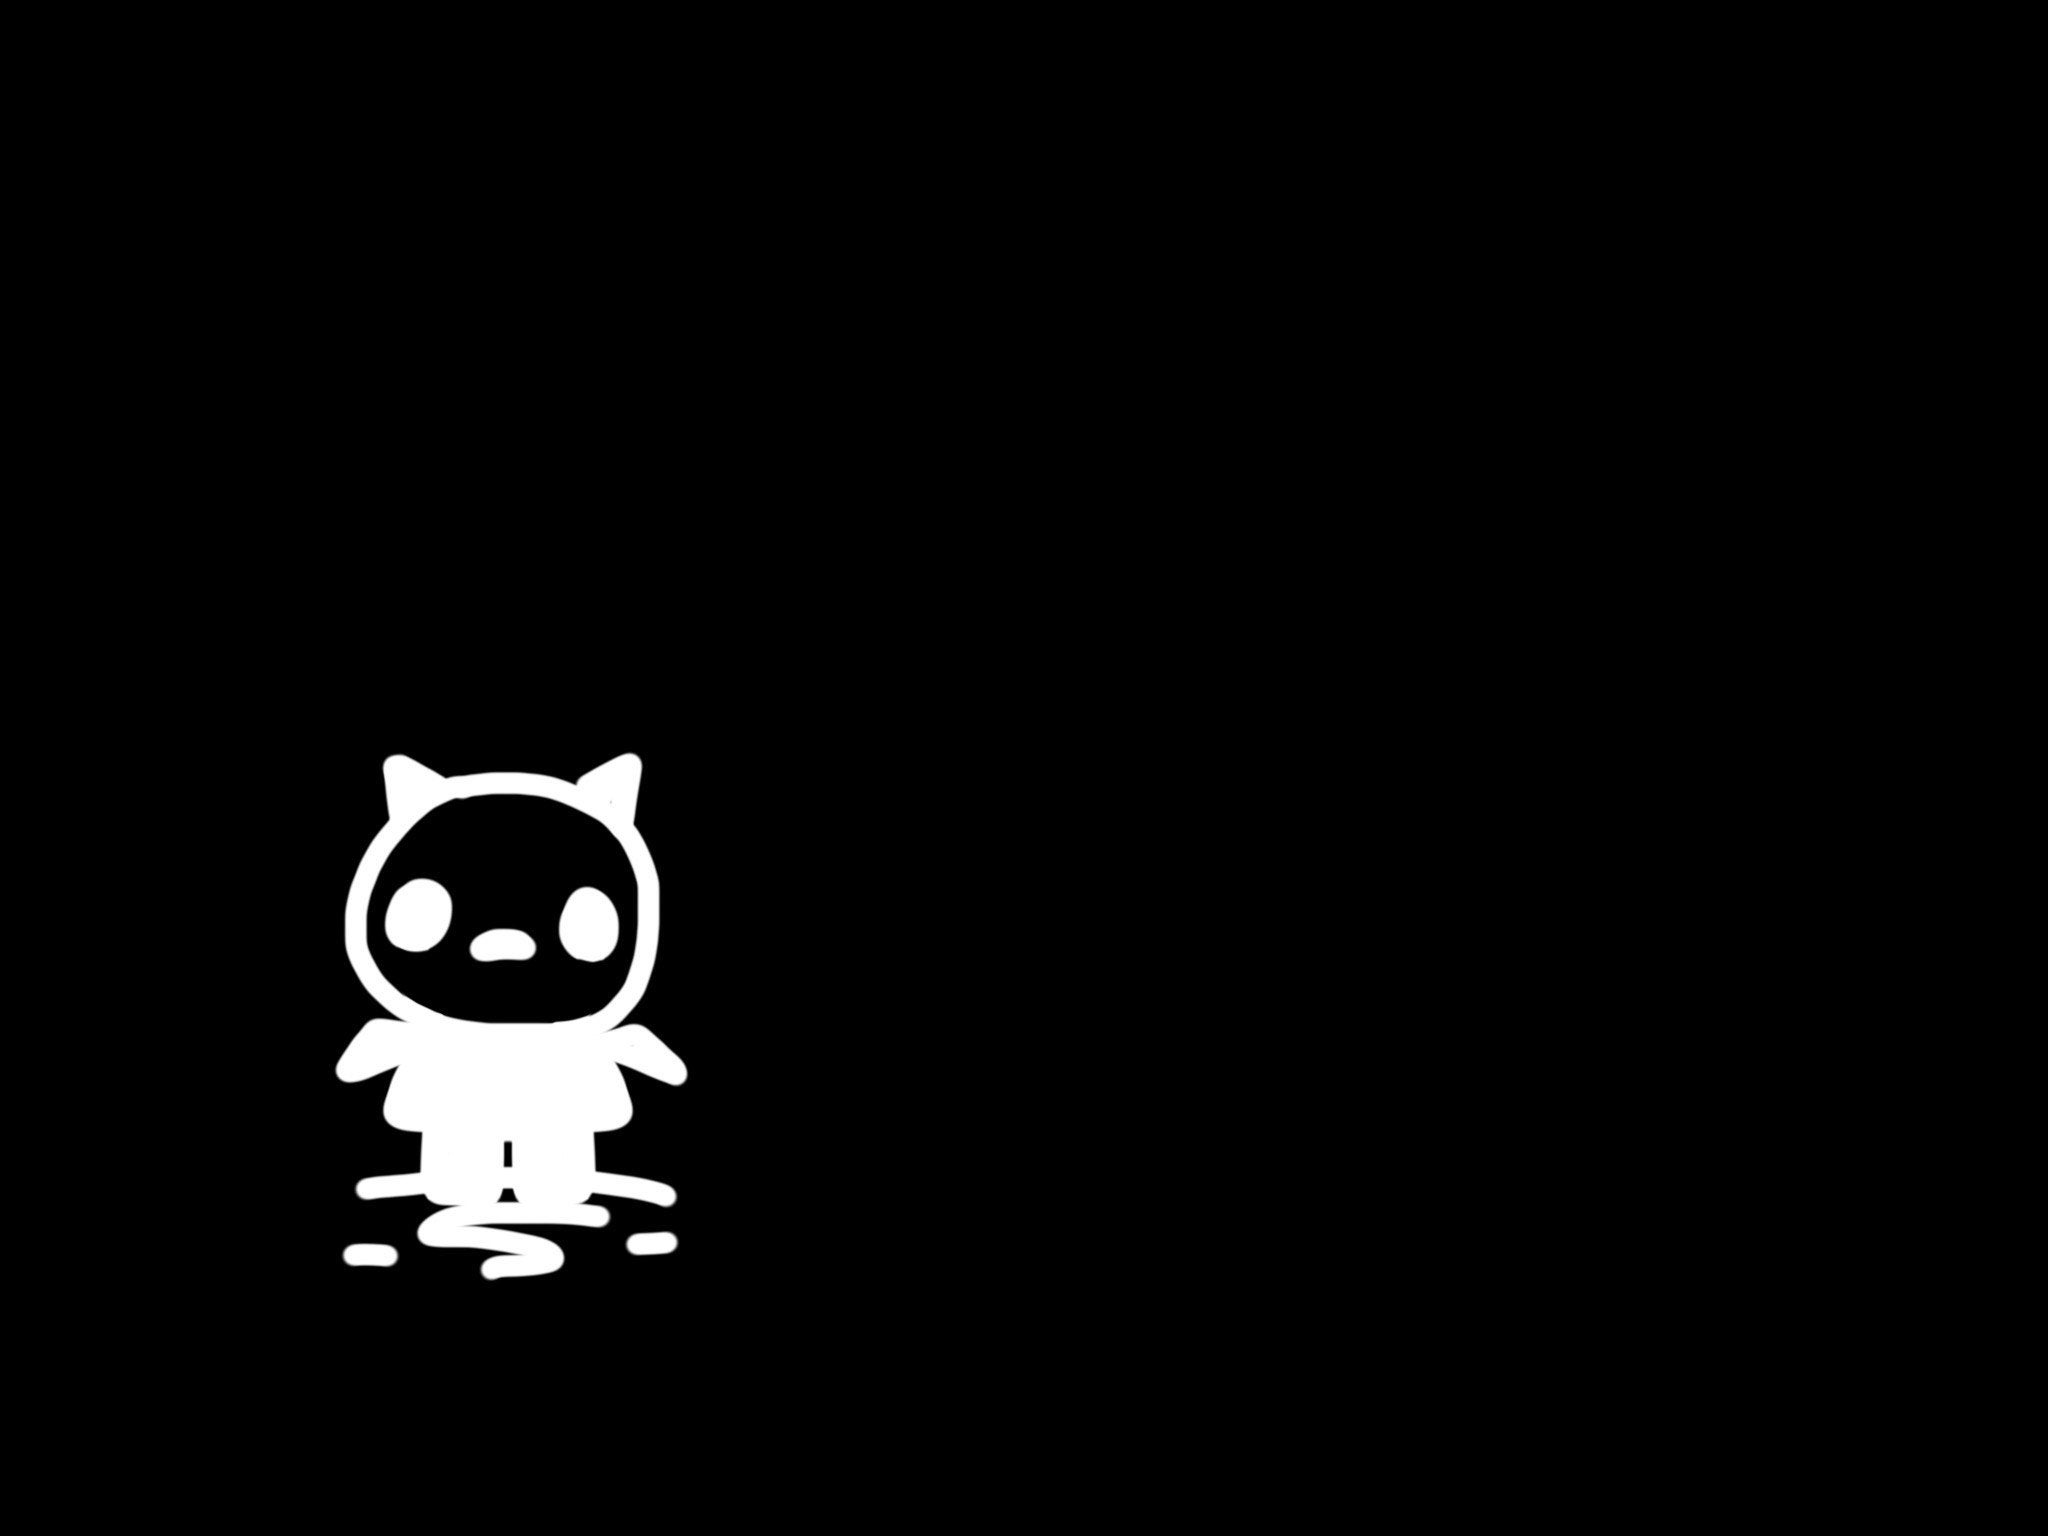 I made wallpapers for each of the isaac charactersantibirth let me know if i forgot any rbindingofisaac